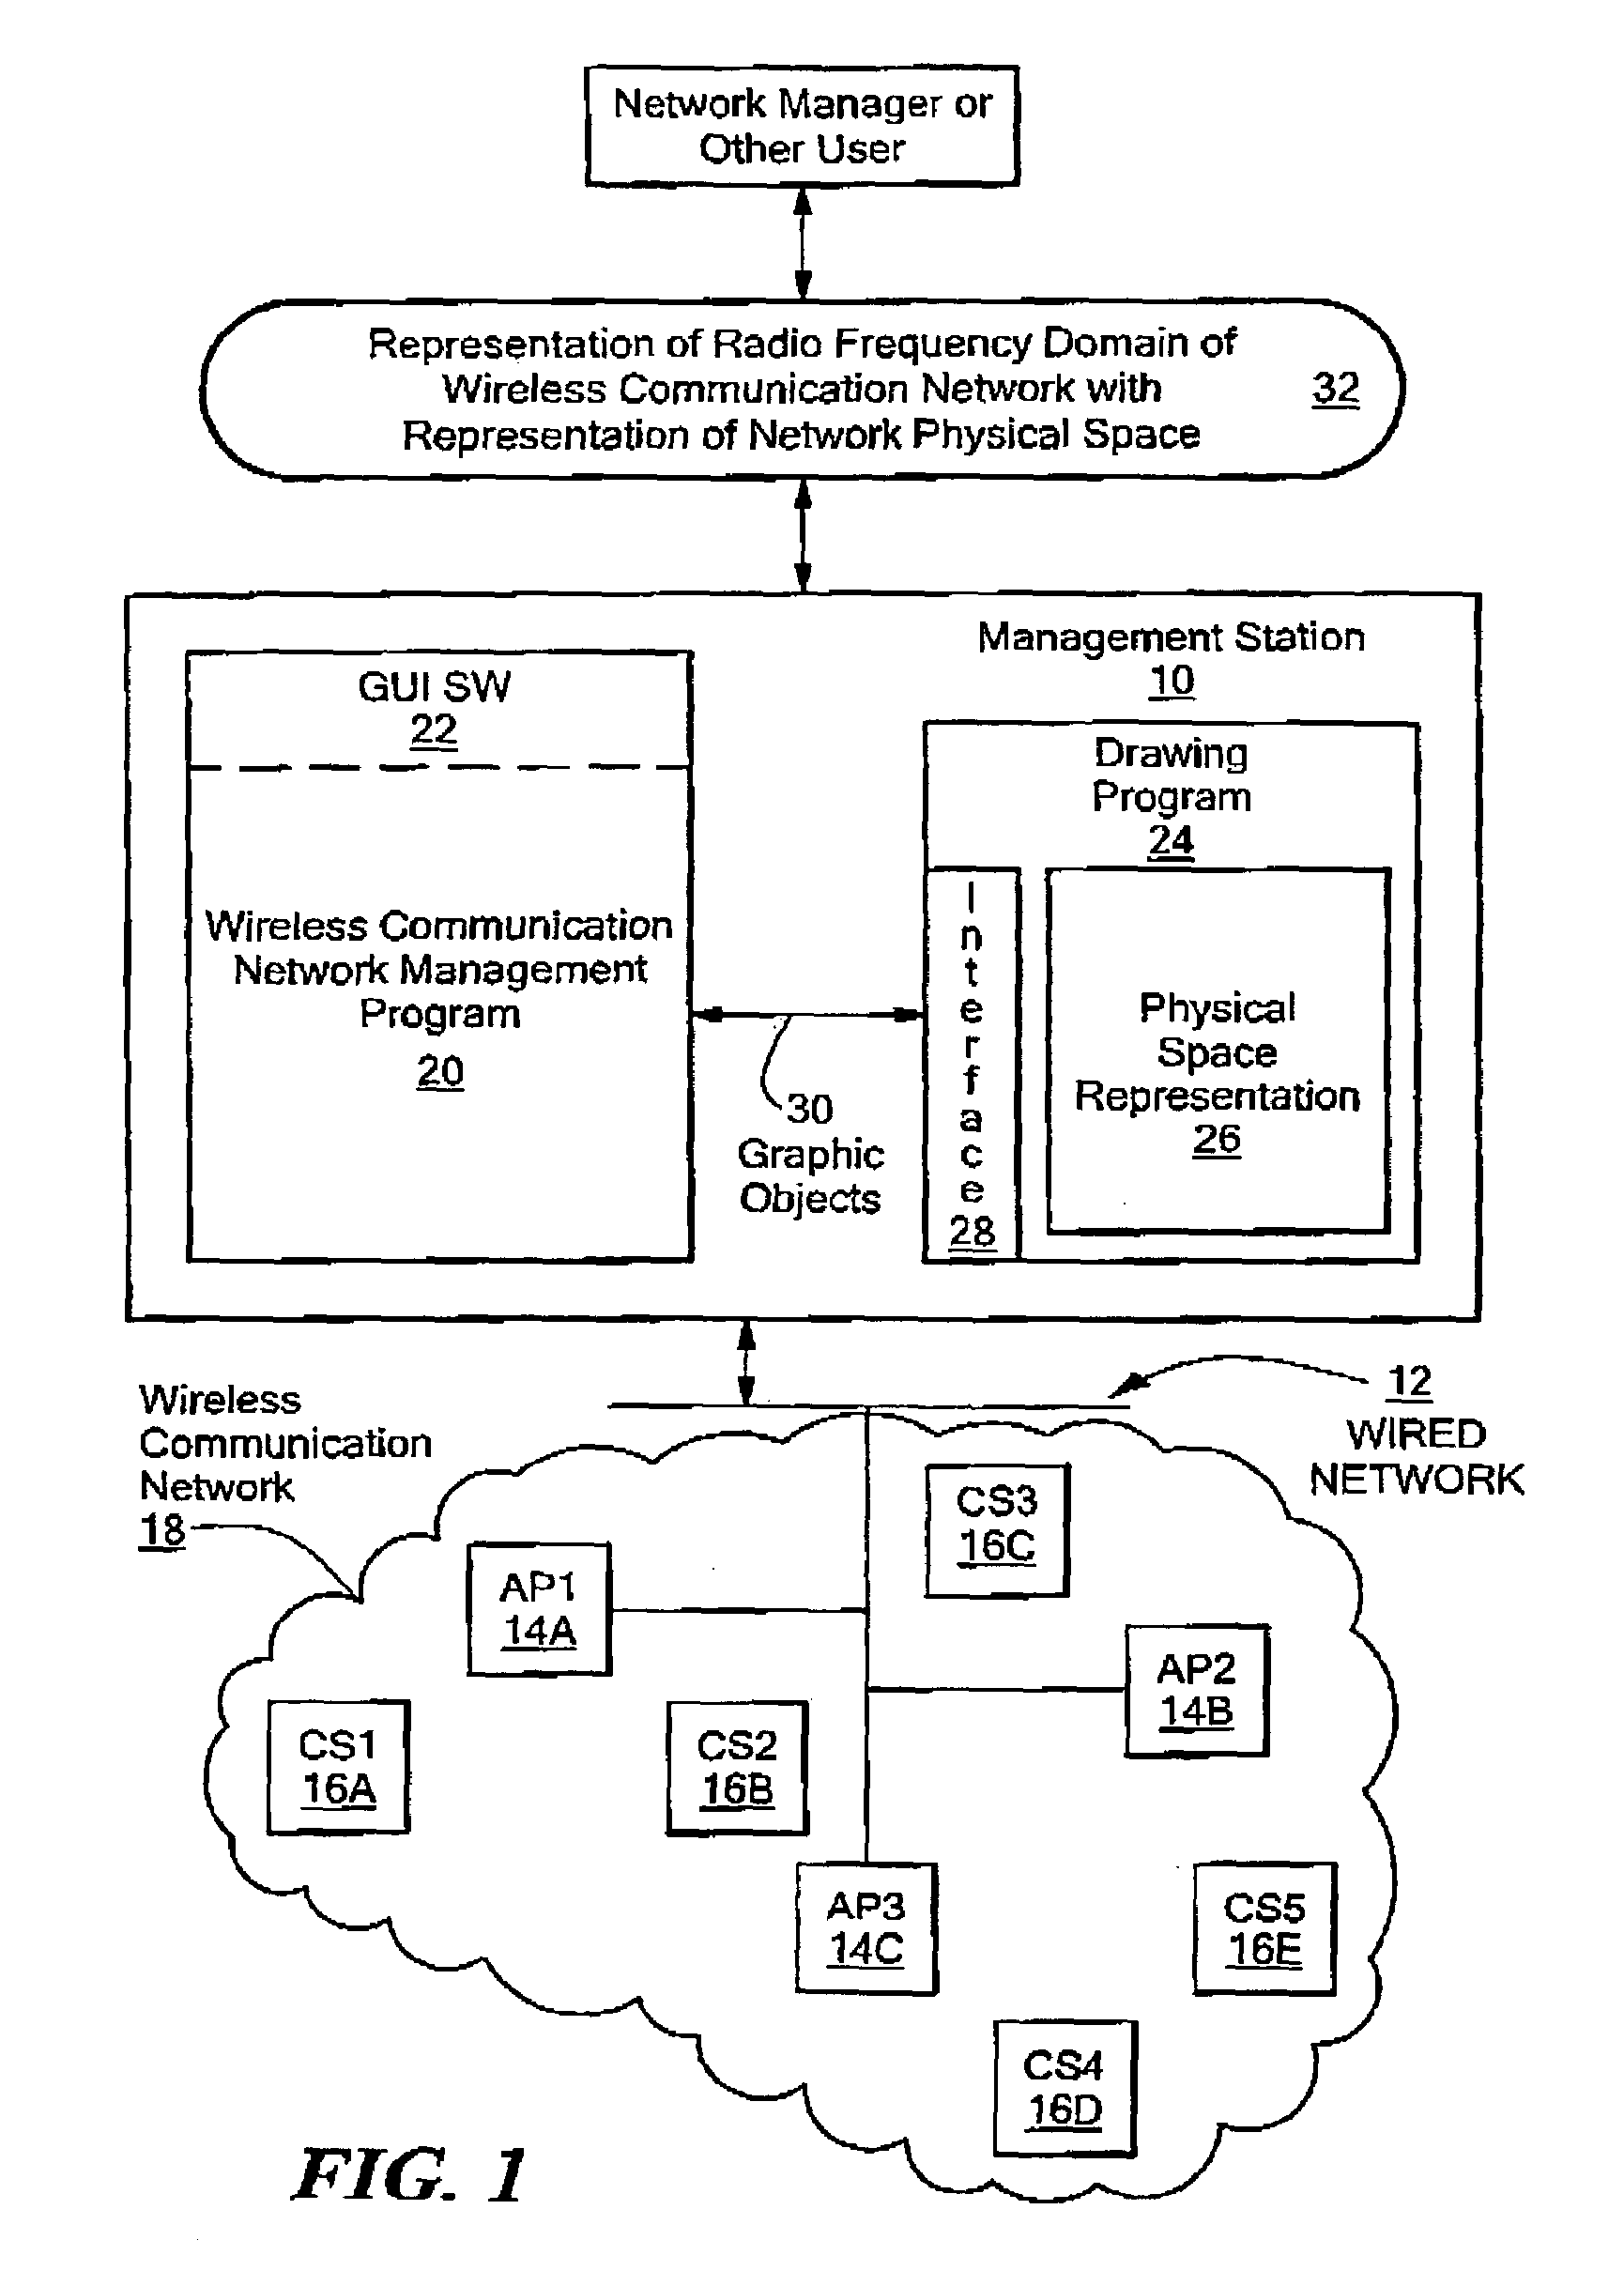 Automatically populated display regions for discovered access points and stations in a user interface representing a wireless communication network deployed in a physical environment